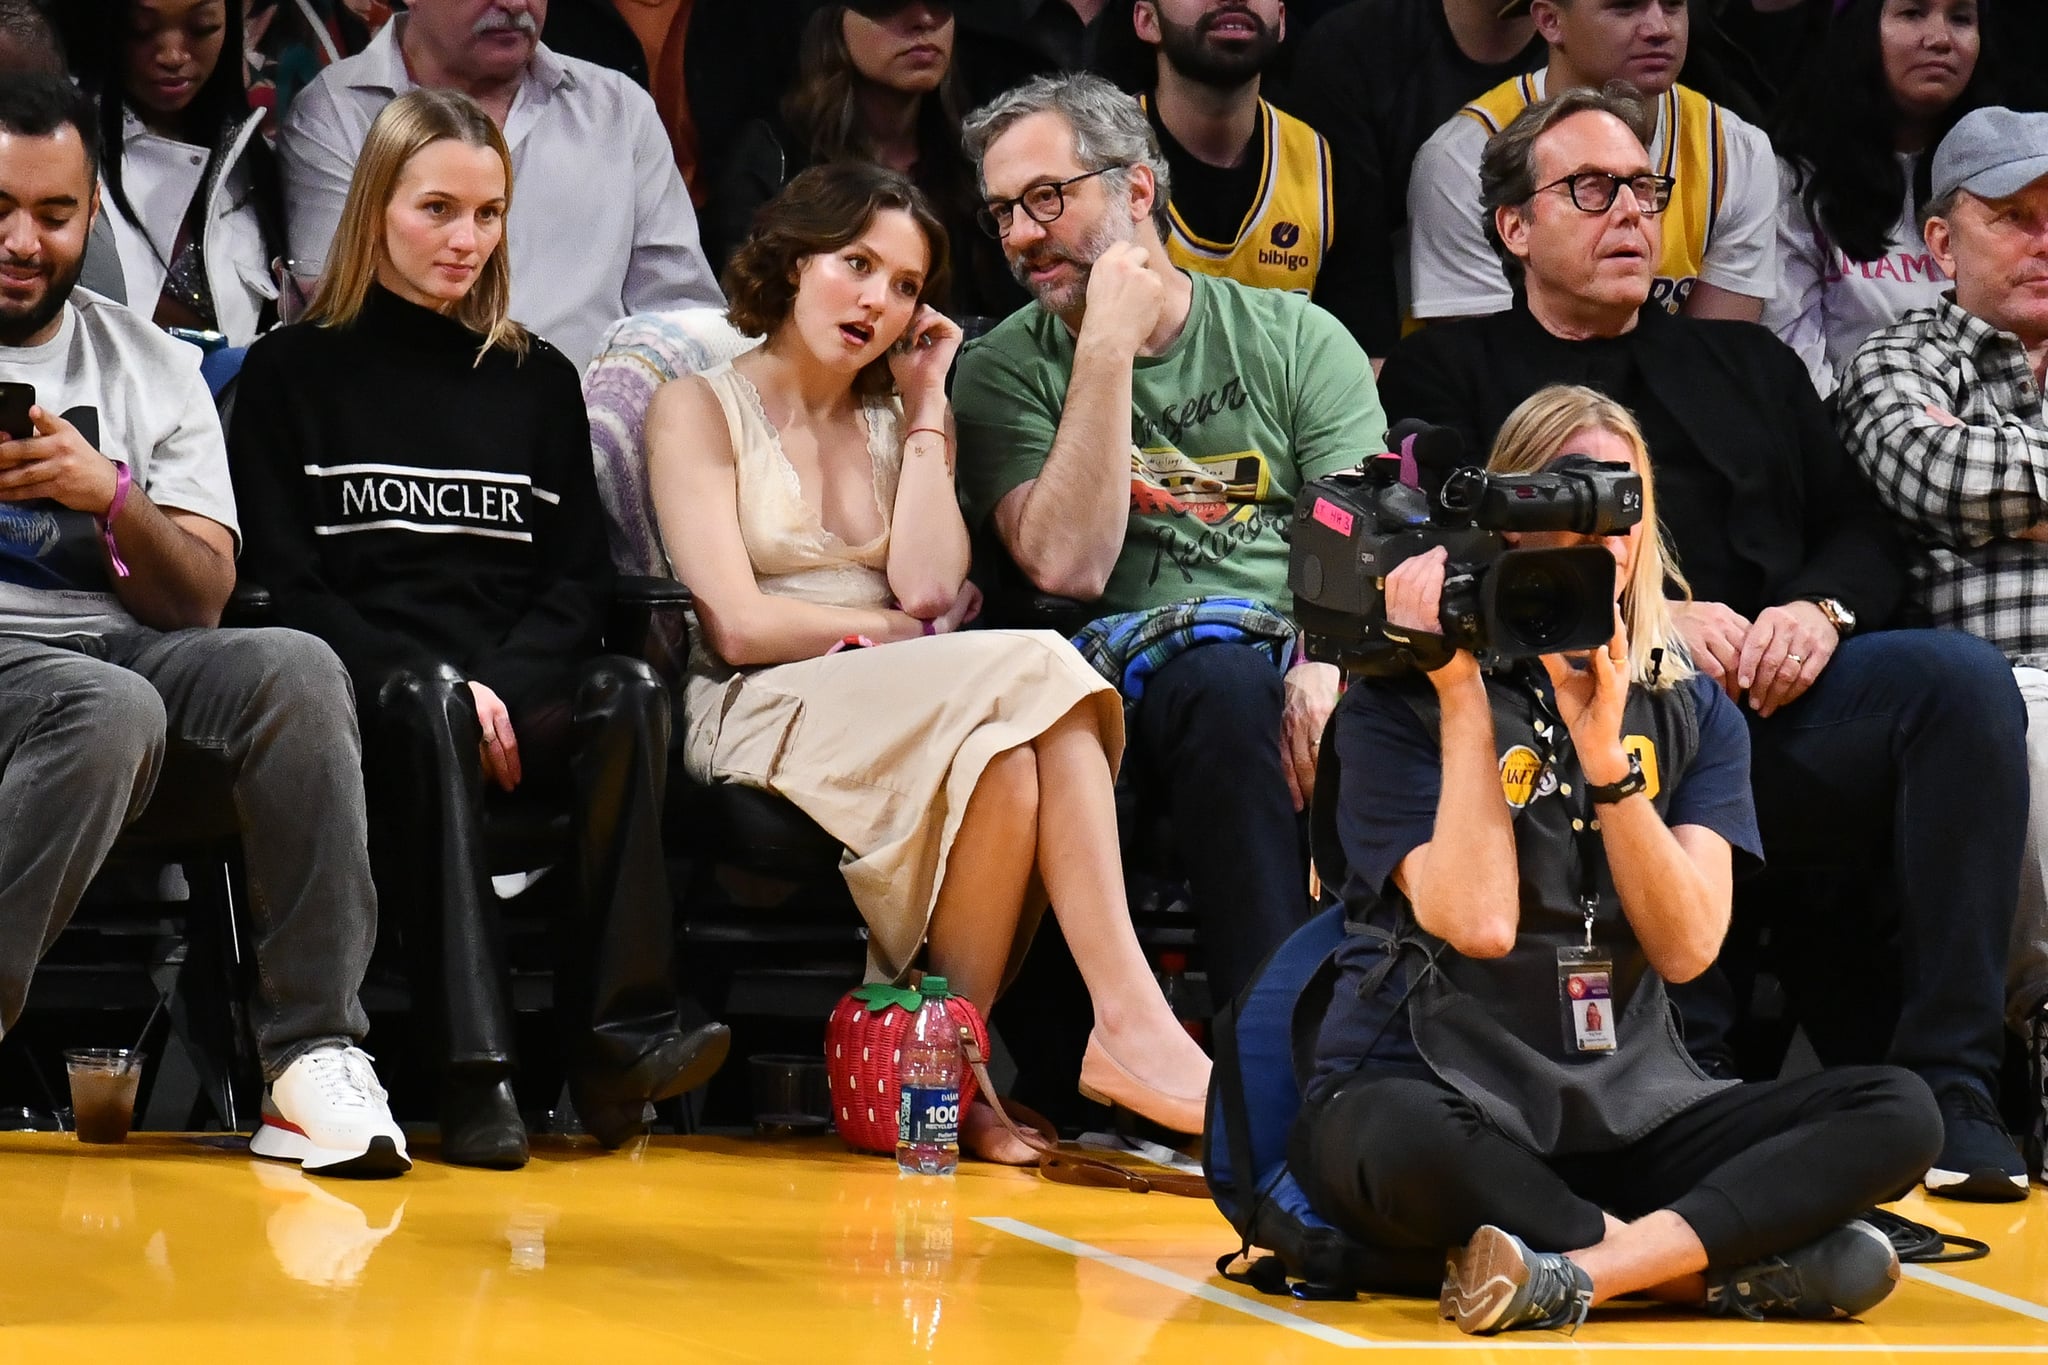 Iris Apatow and her dad Judd Apatow attend the Los Angeles Lakers